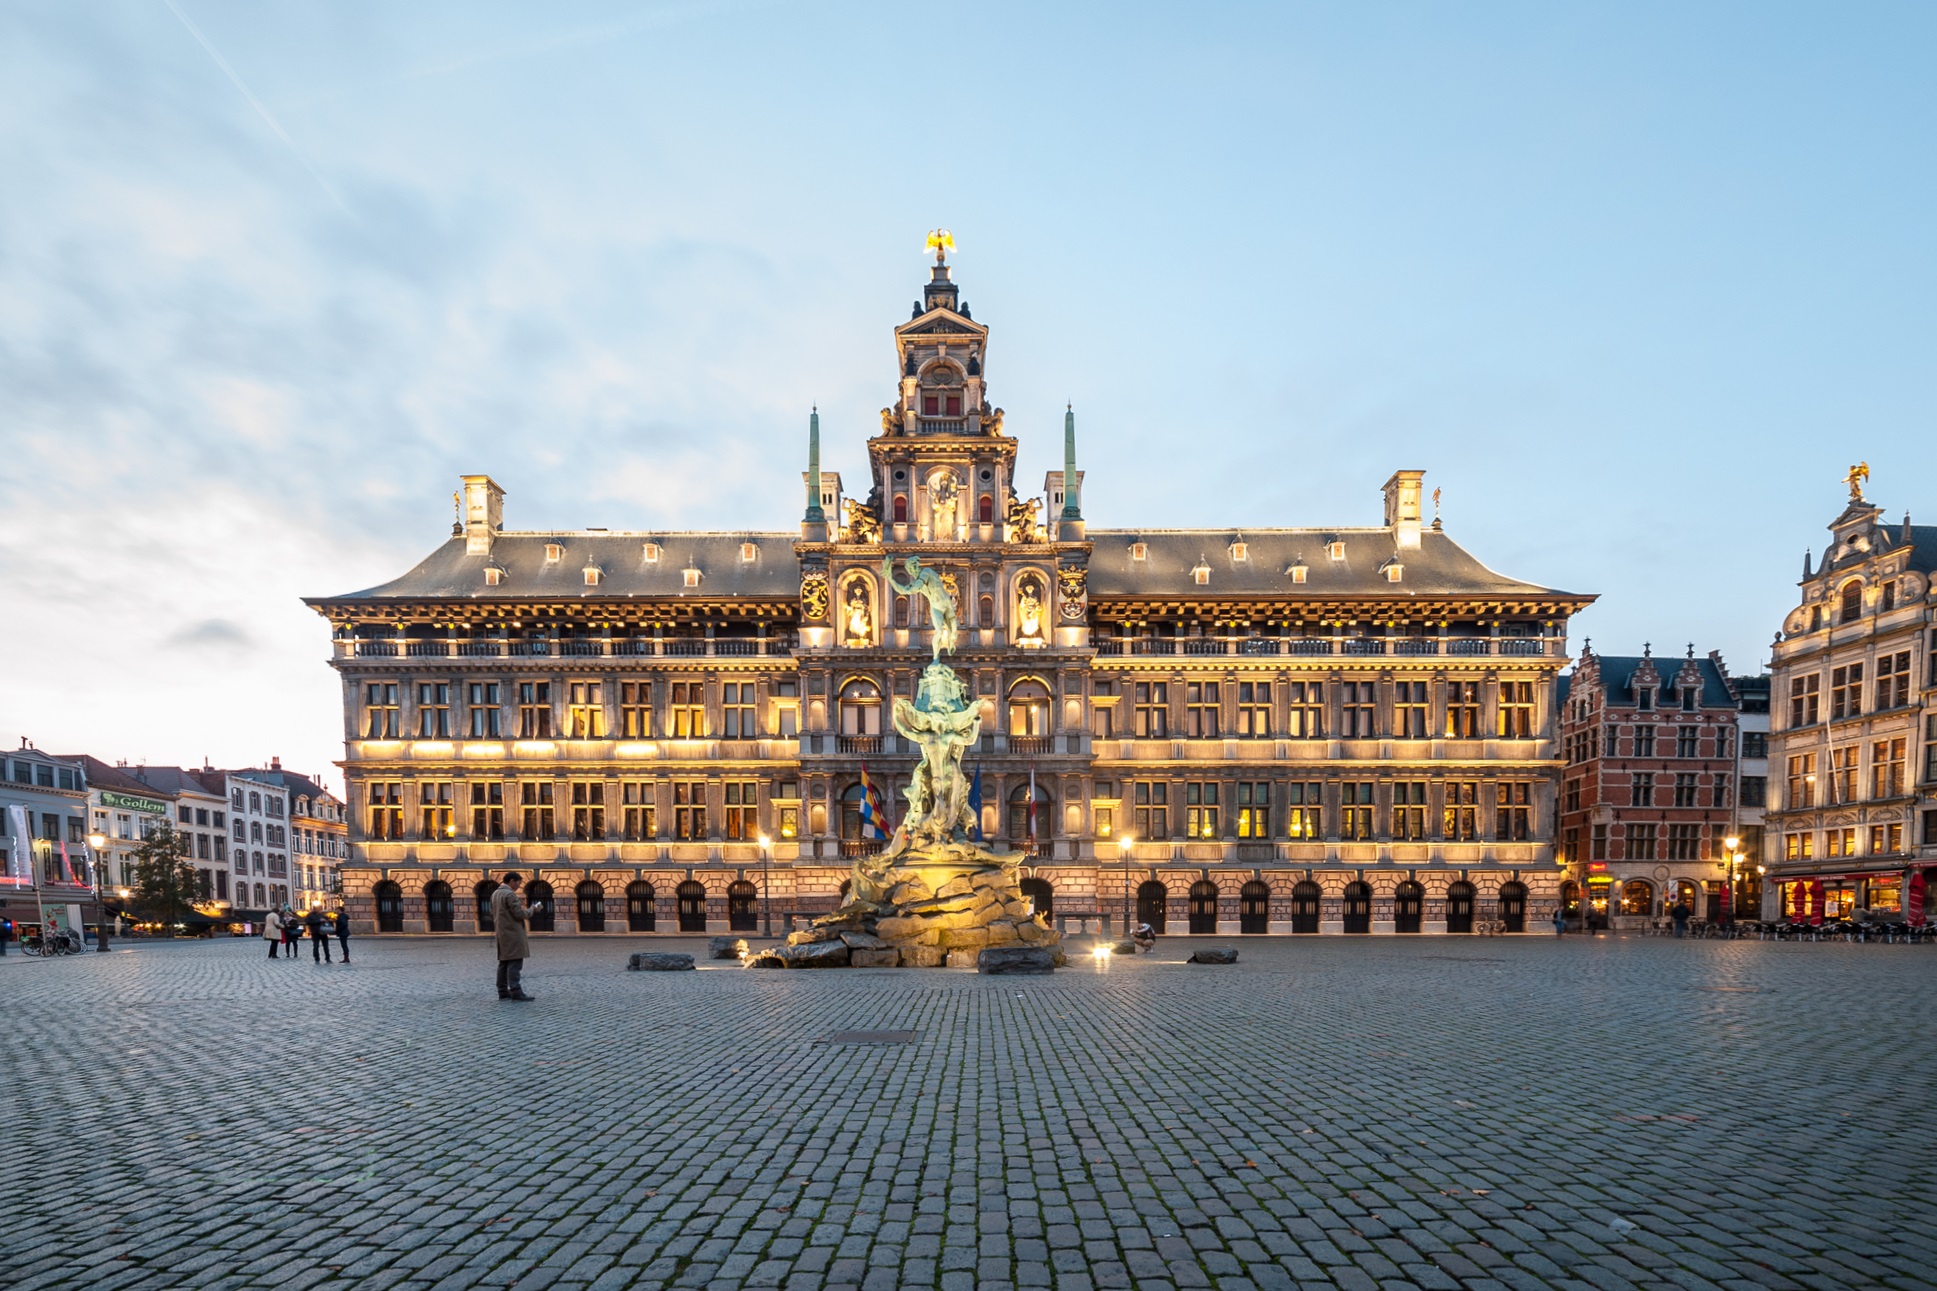 A palace for world citizens